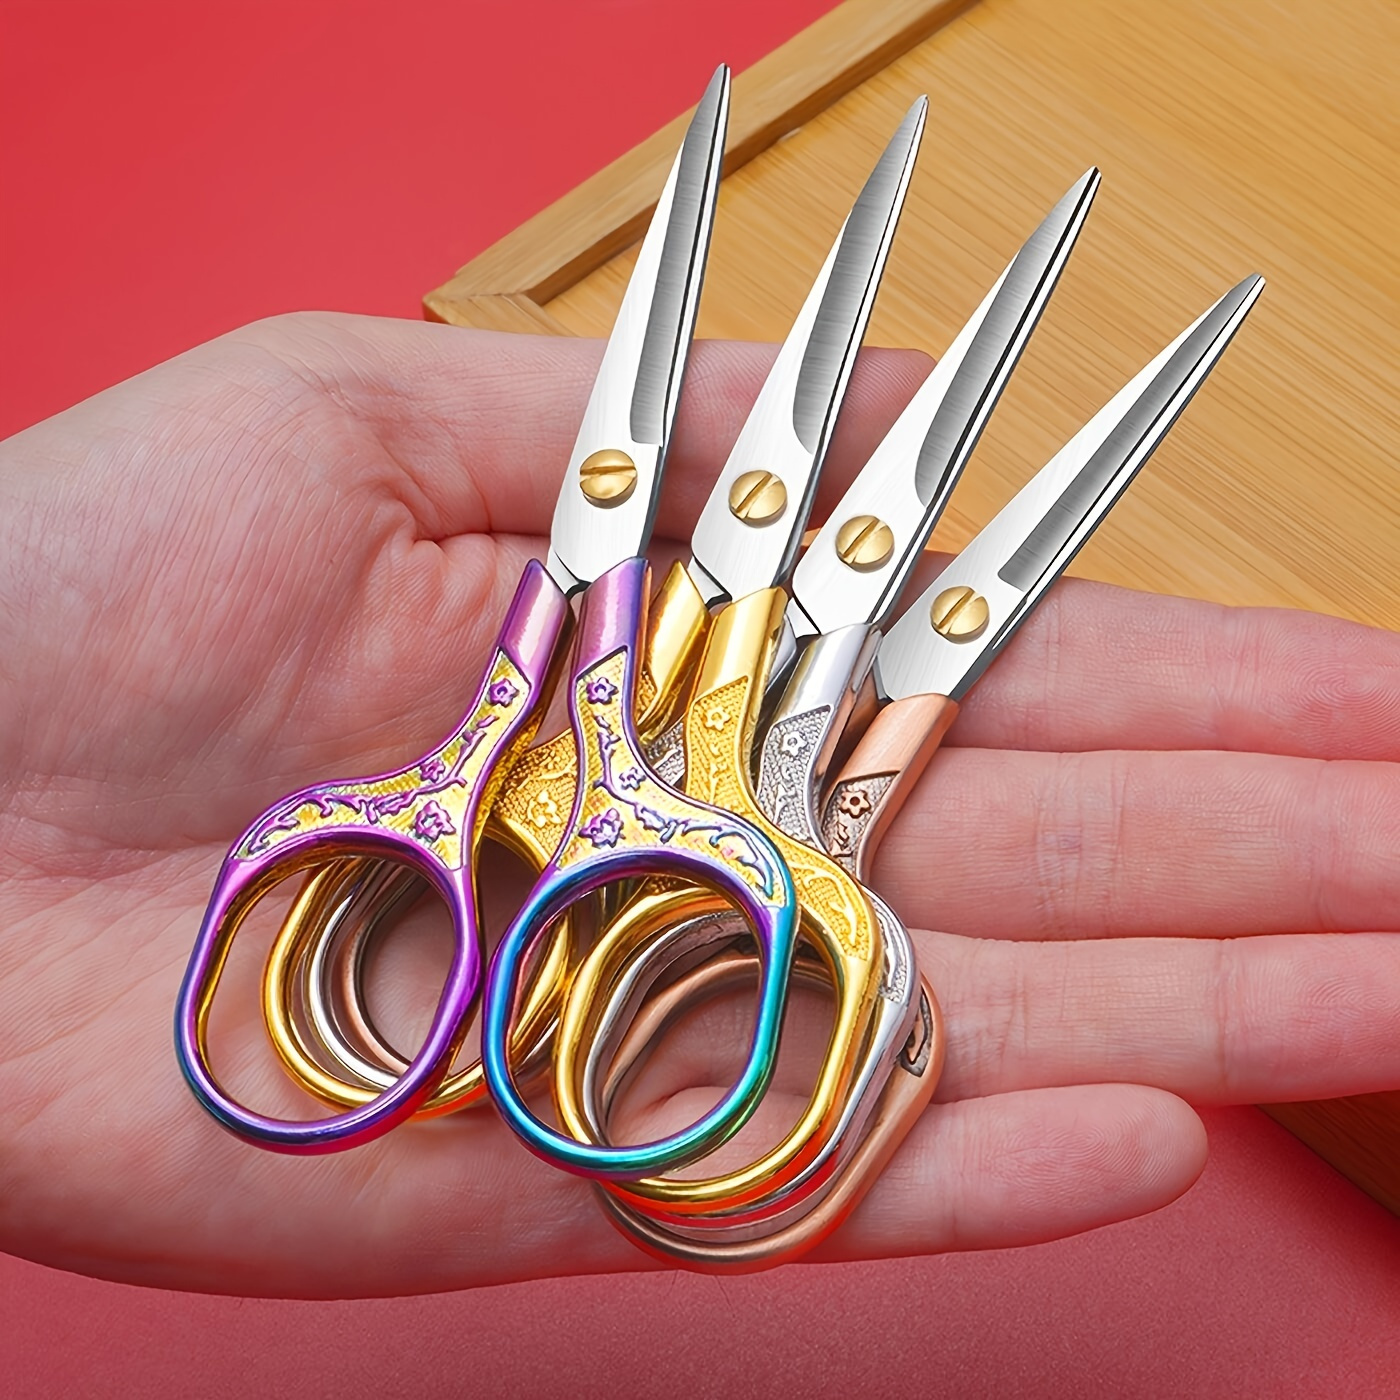 

1pc Stainless Steel Paper-cut Embroidery Scissors, Vintage Scissors Handcraft Pointed Scissors, Sewing Shears Tool, Gift Alloy Scissors 5.9cm/2.3in